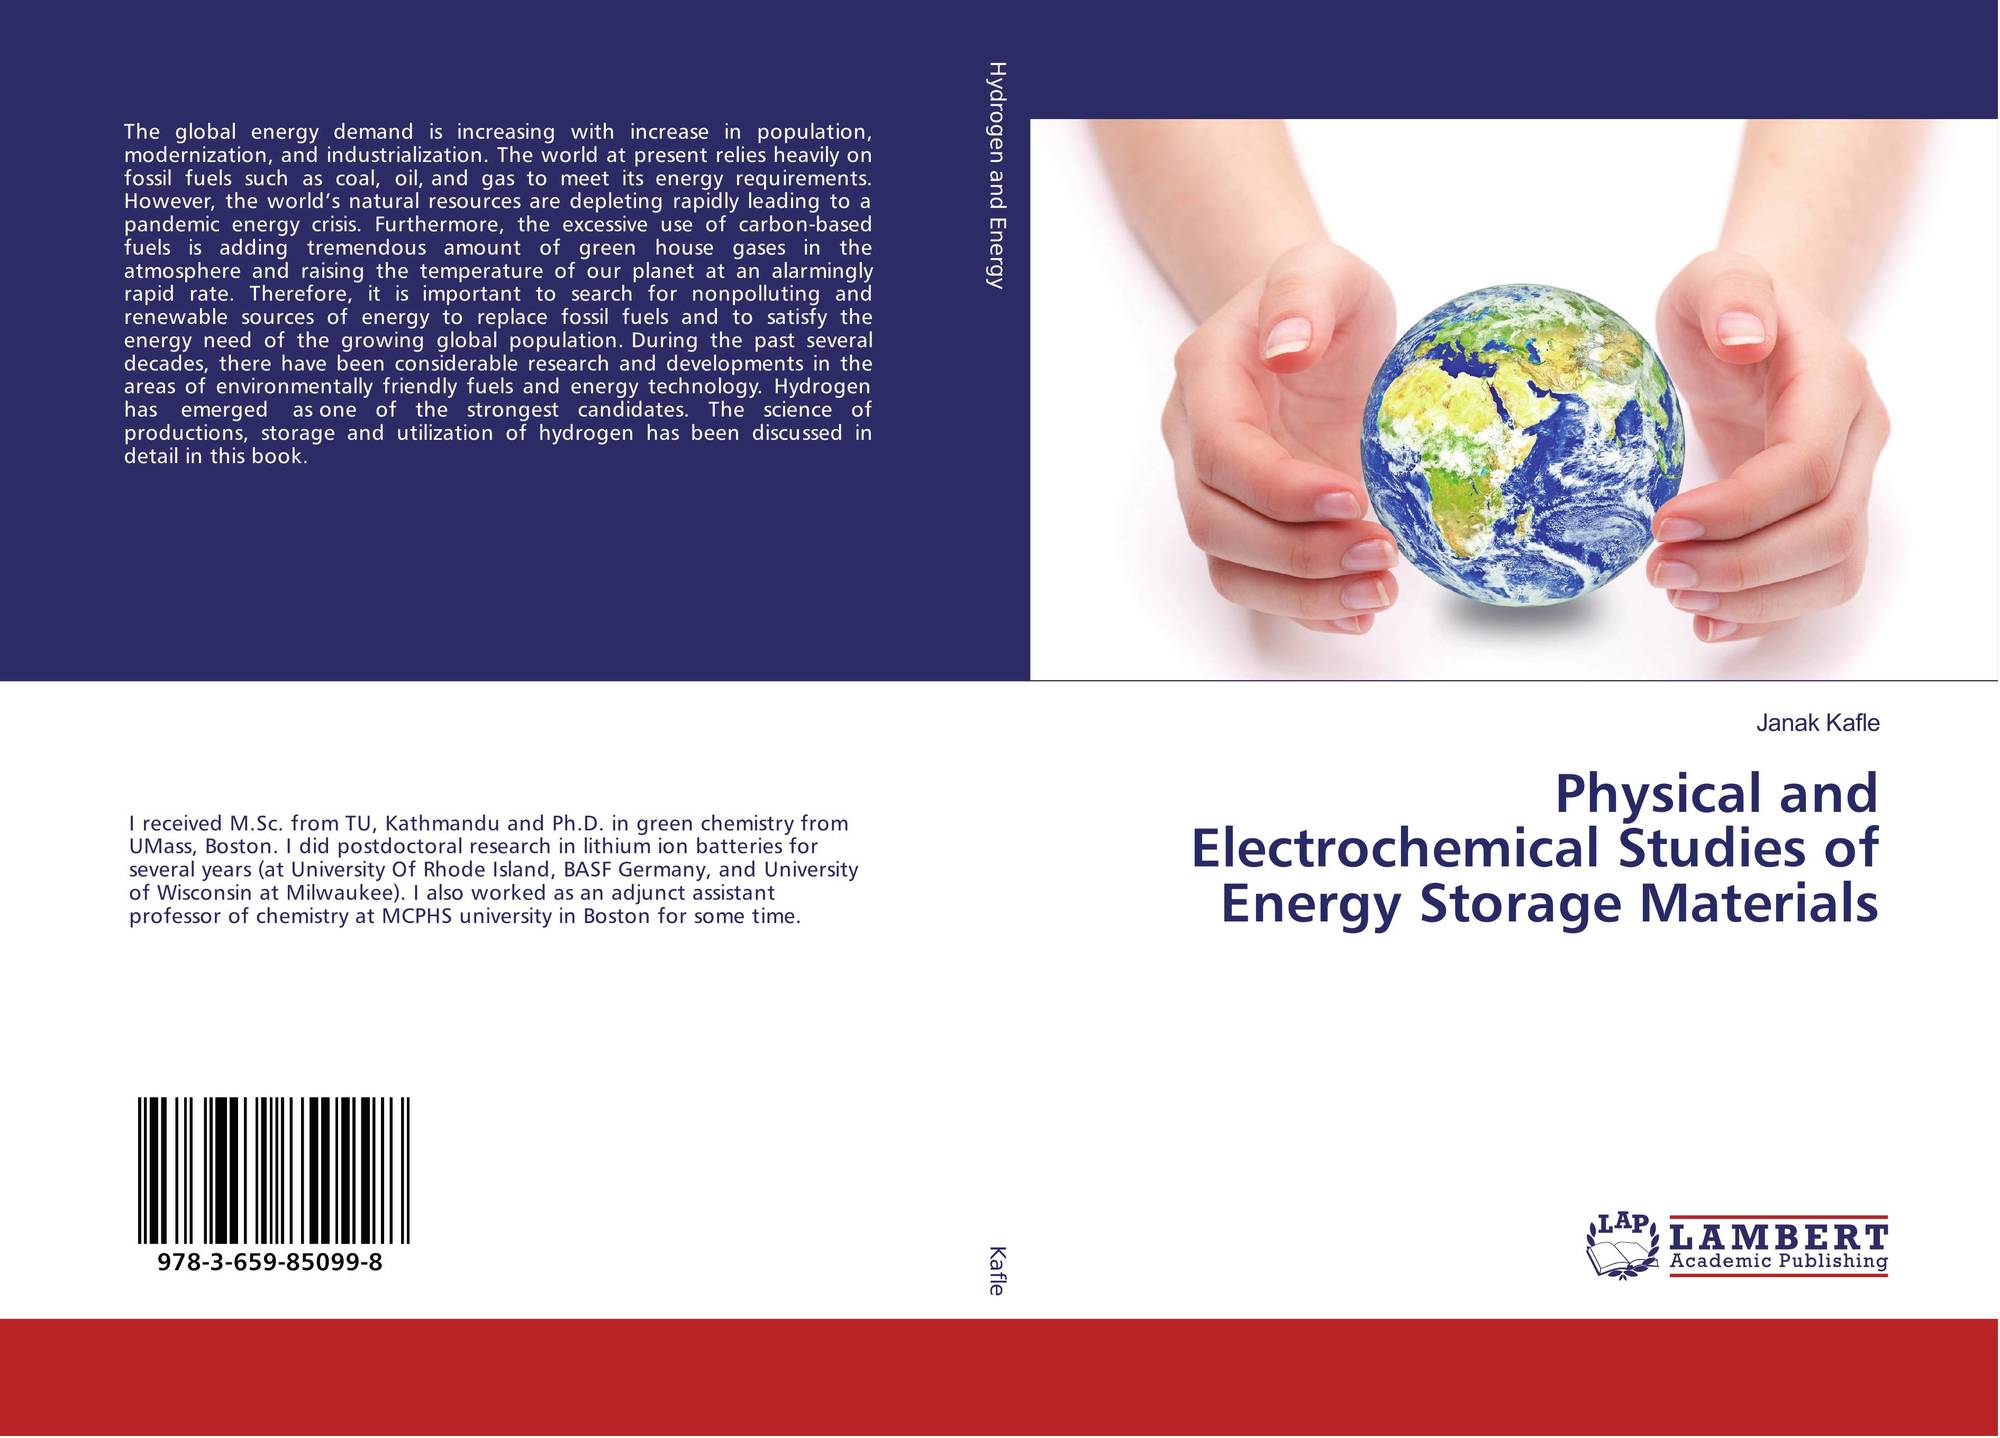 Physical and Electrochemical Studies of Energy Storage Materials, 978-3